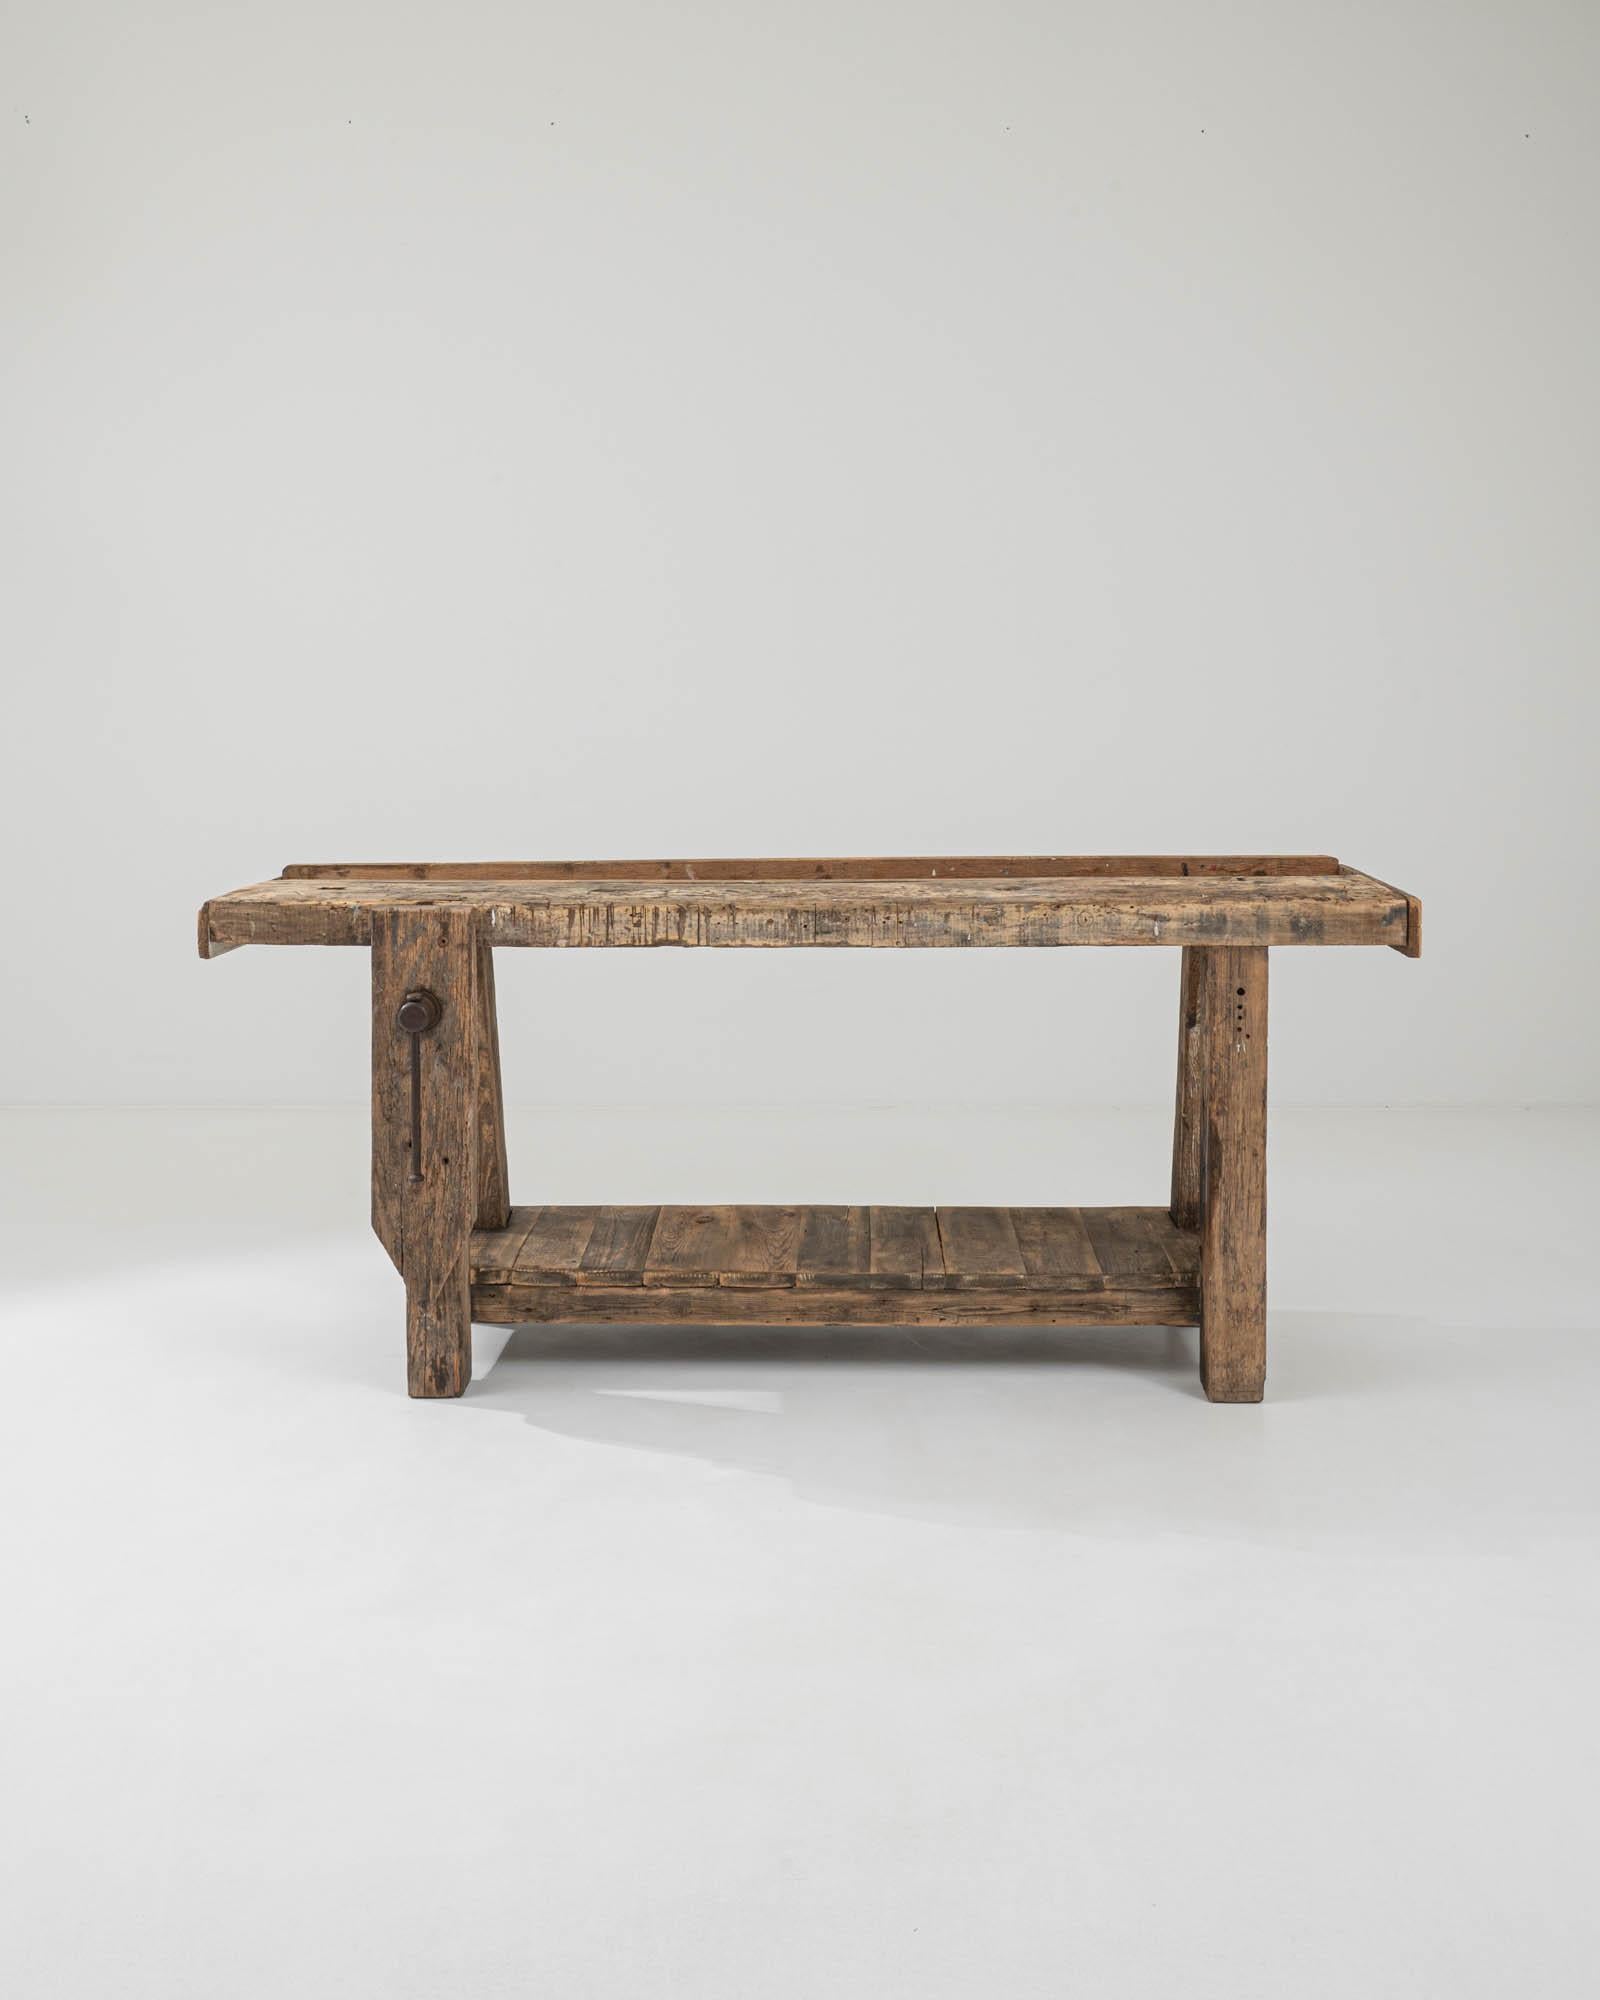 A wooden work table created in 20th century France. Weathered and time-touched, this distinguished workbench casts an aura of confidence and grand age. A simple and solid construction allows the compelling details upon it to shine. Dents, burns,